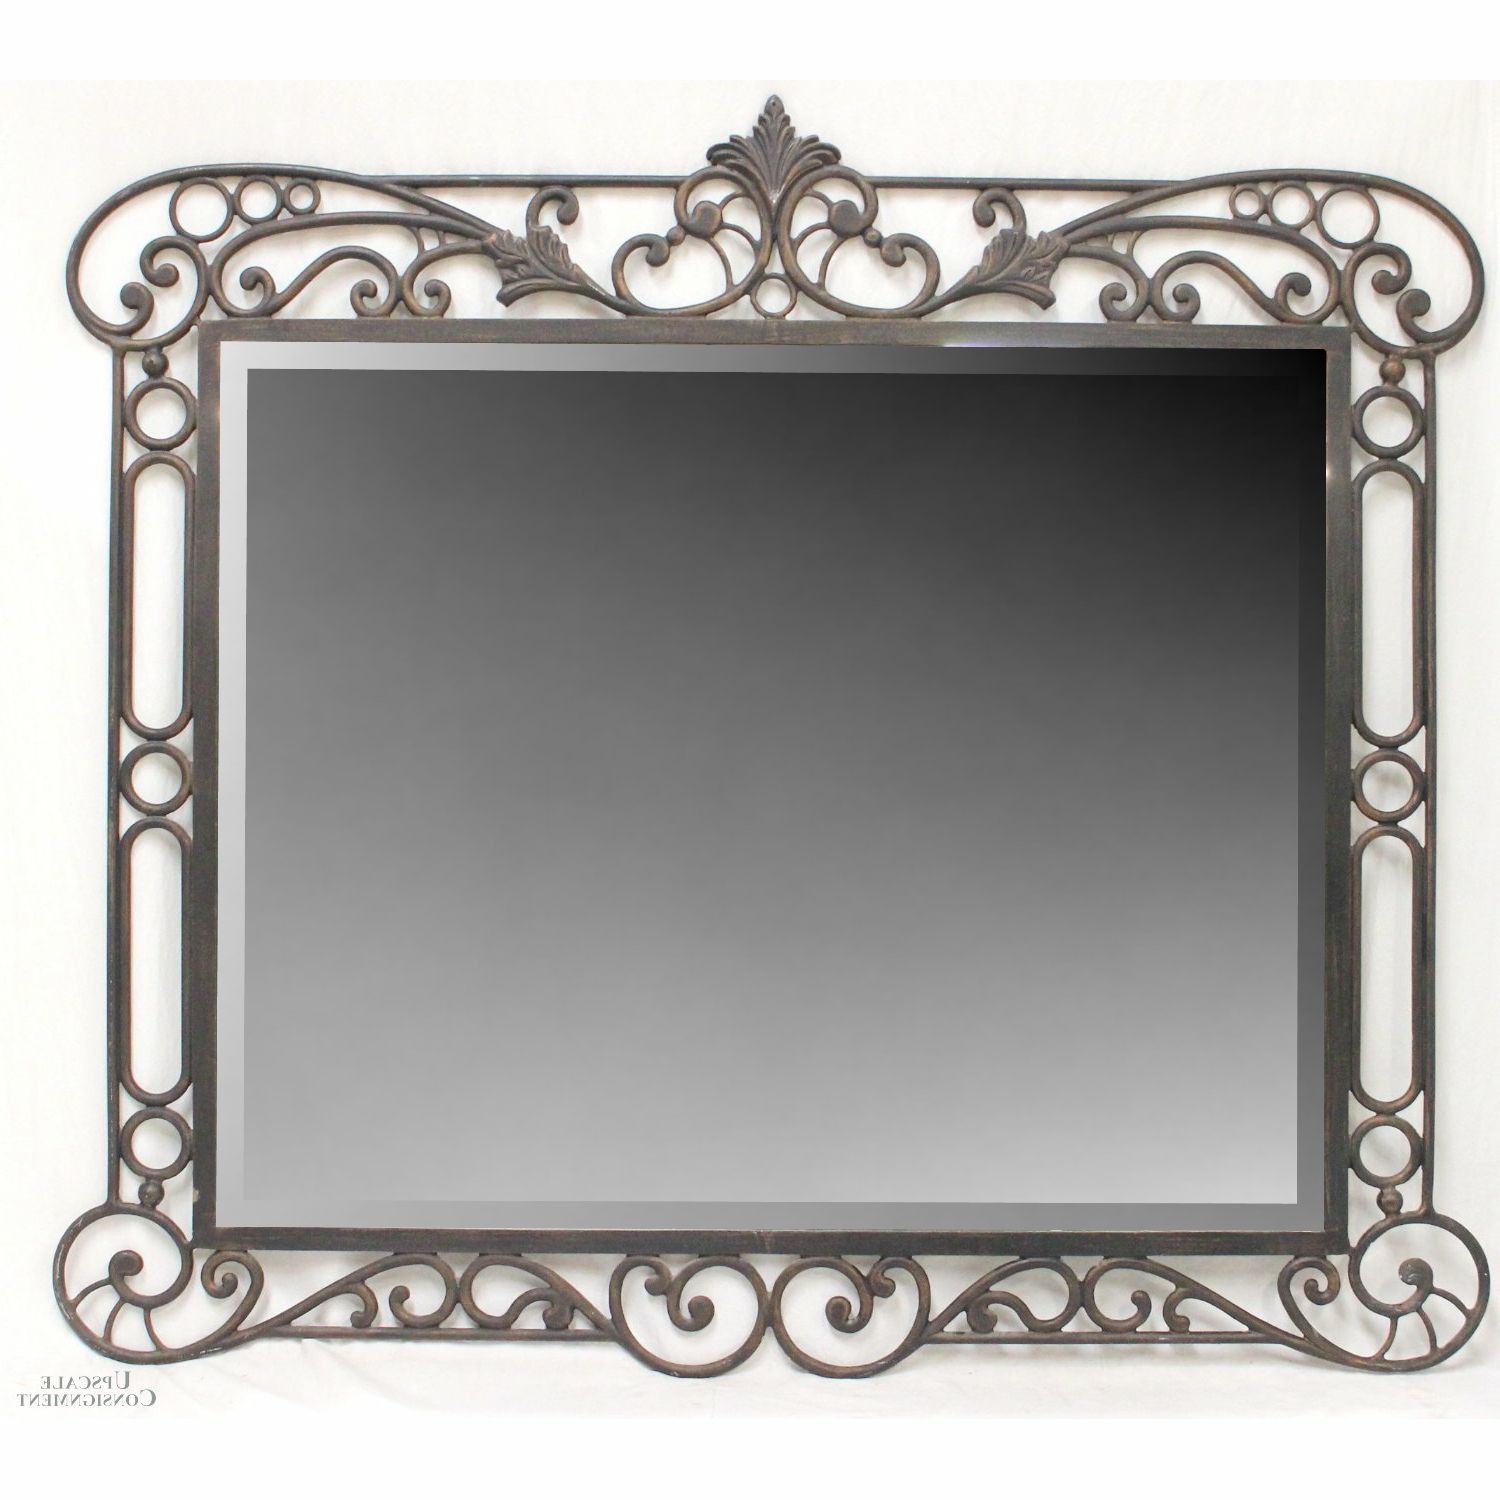 Upscale Consignment Throughout Well Liked Wrought Iron Wall Mirrors (View 10 of 20)